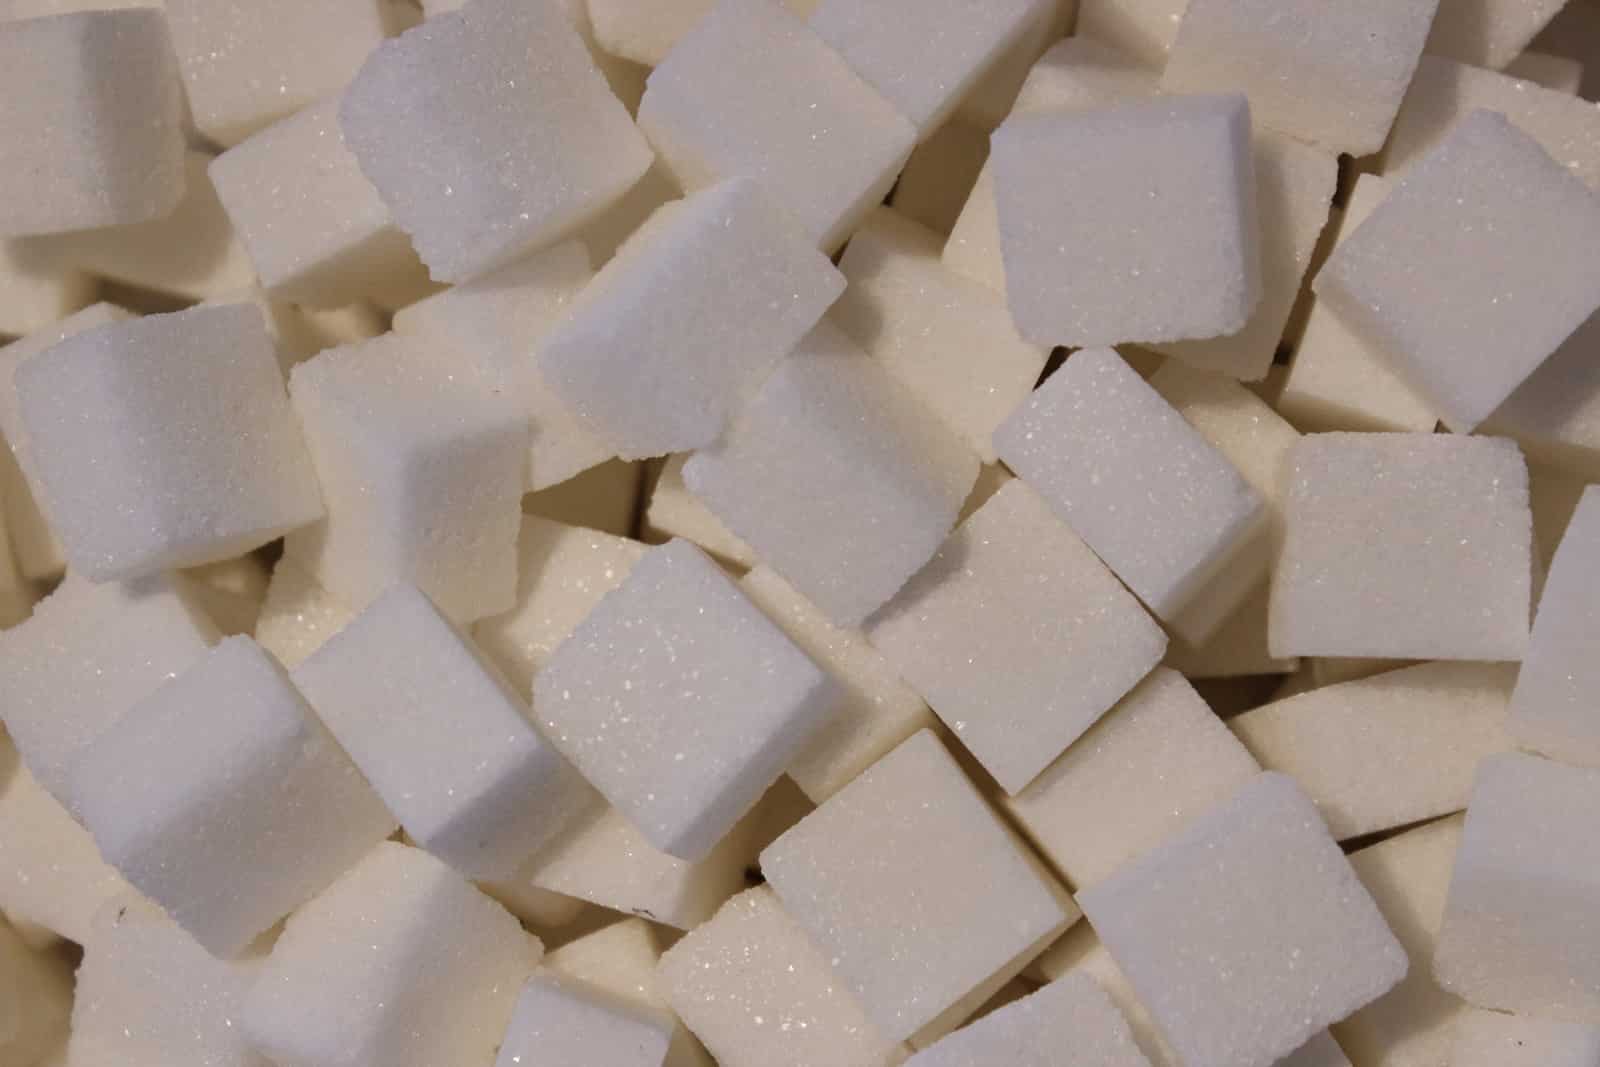 Different Types of Sugar